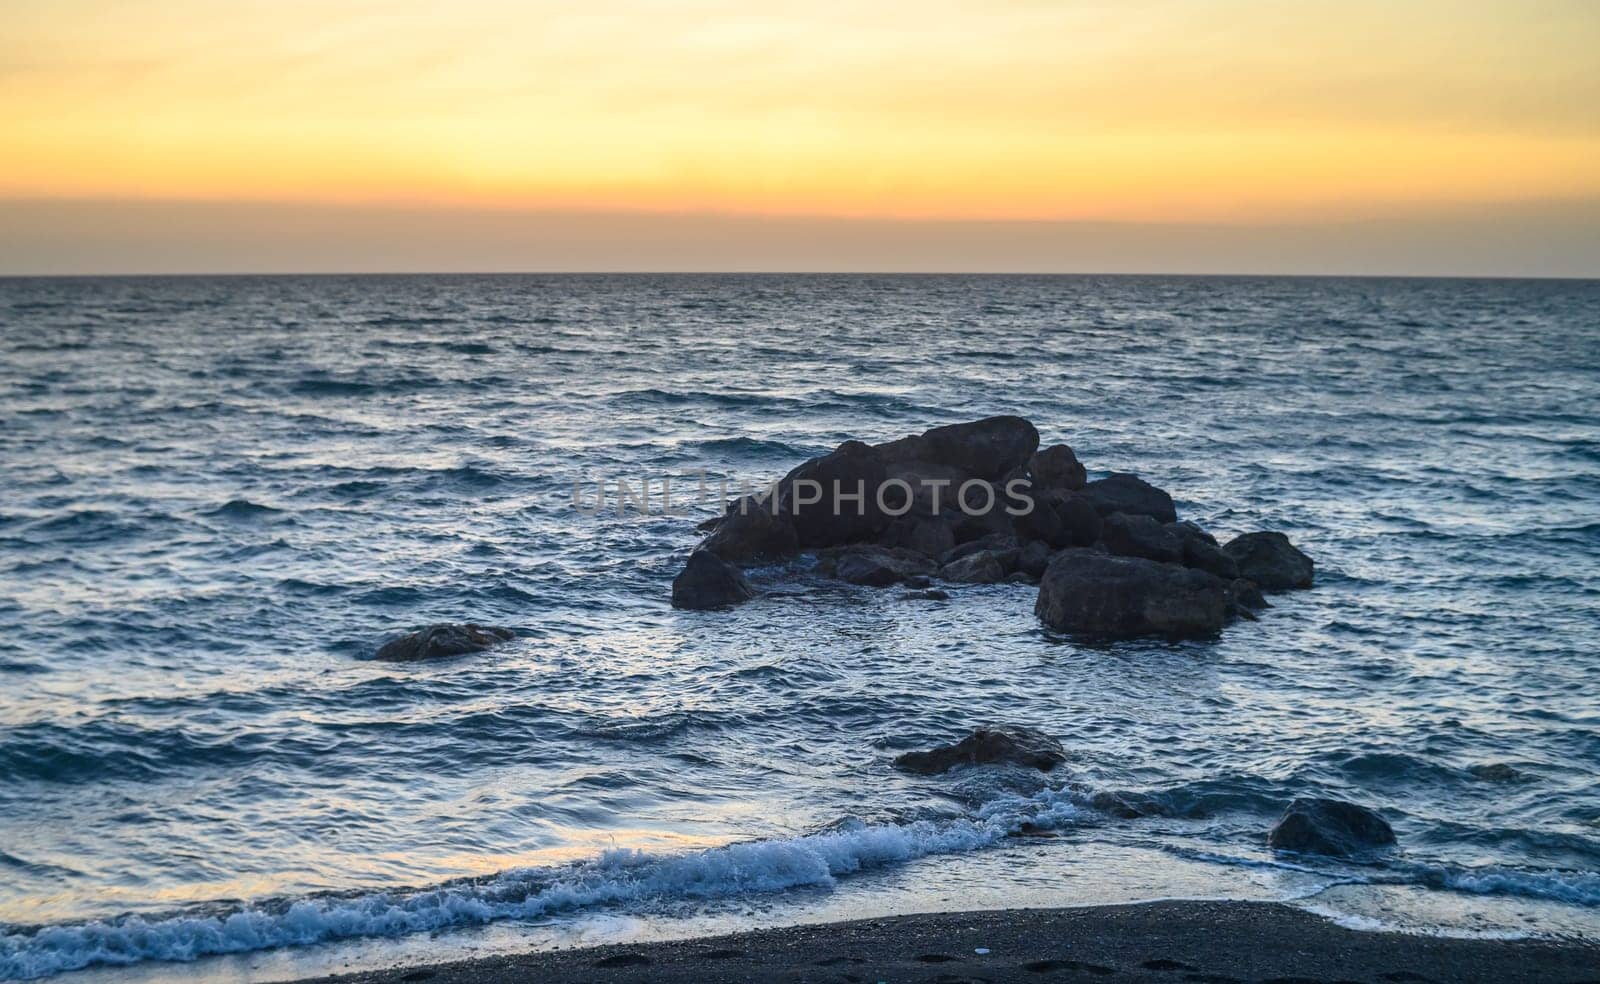 sunset view of stones in the Mediterranean sea near the beach of Cyprus by Mixa74